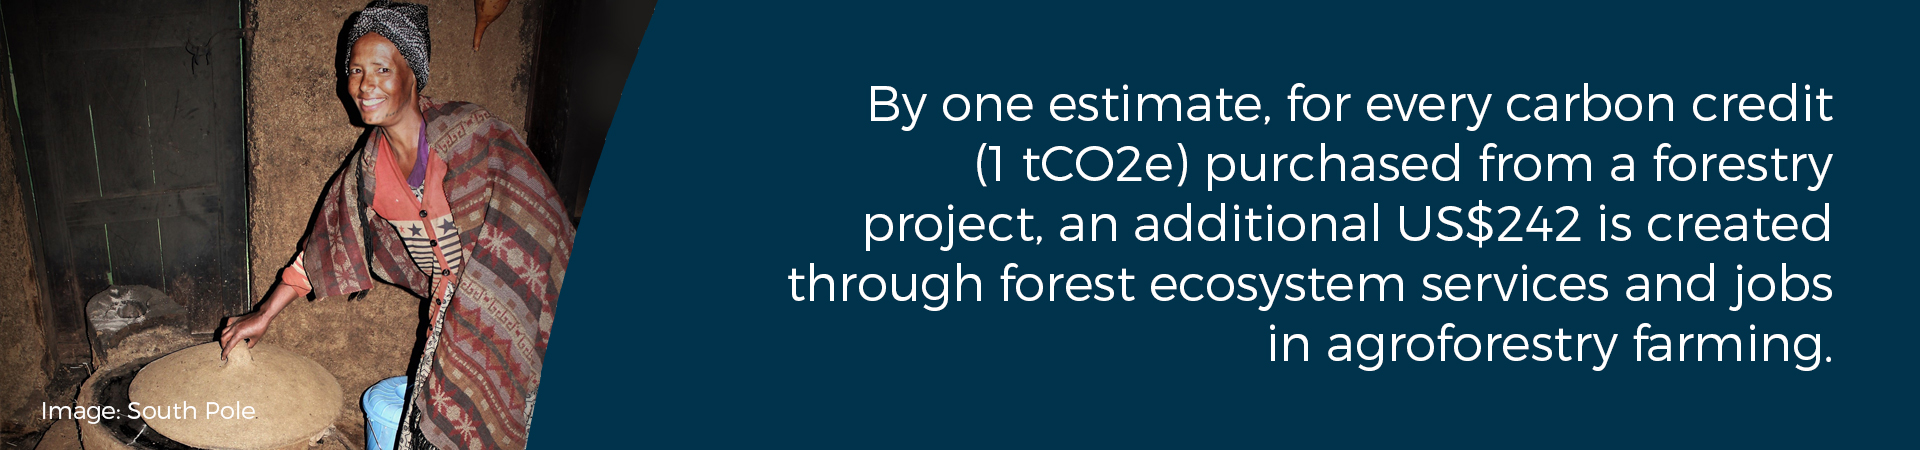 Banner - "by one estimate, for every carbon credit (1 tCO2e) purchased from a forestry project, an additional US$242 is created through forest ecosystem services and jobs in agroforestry farming"